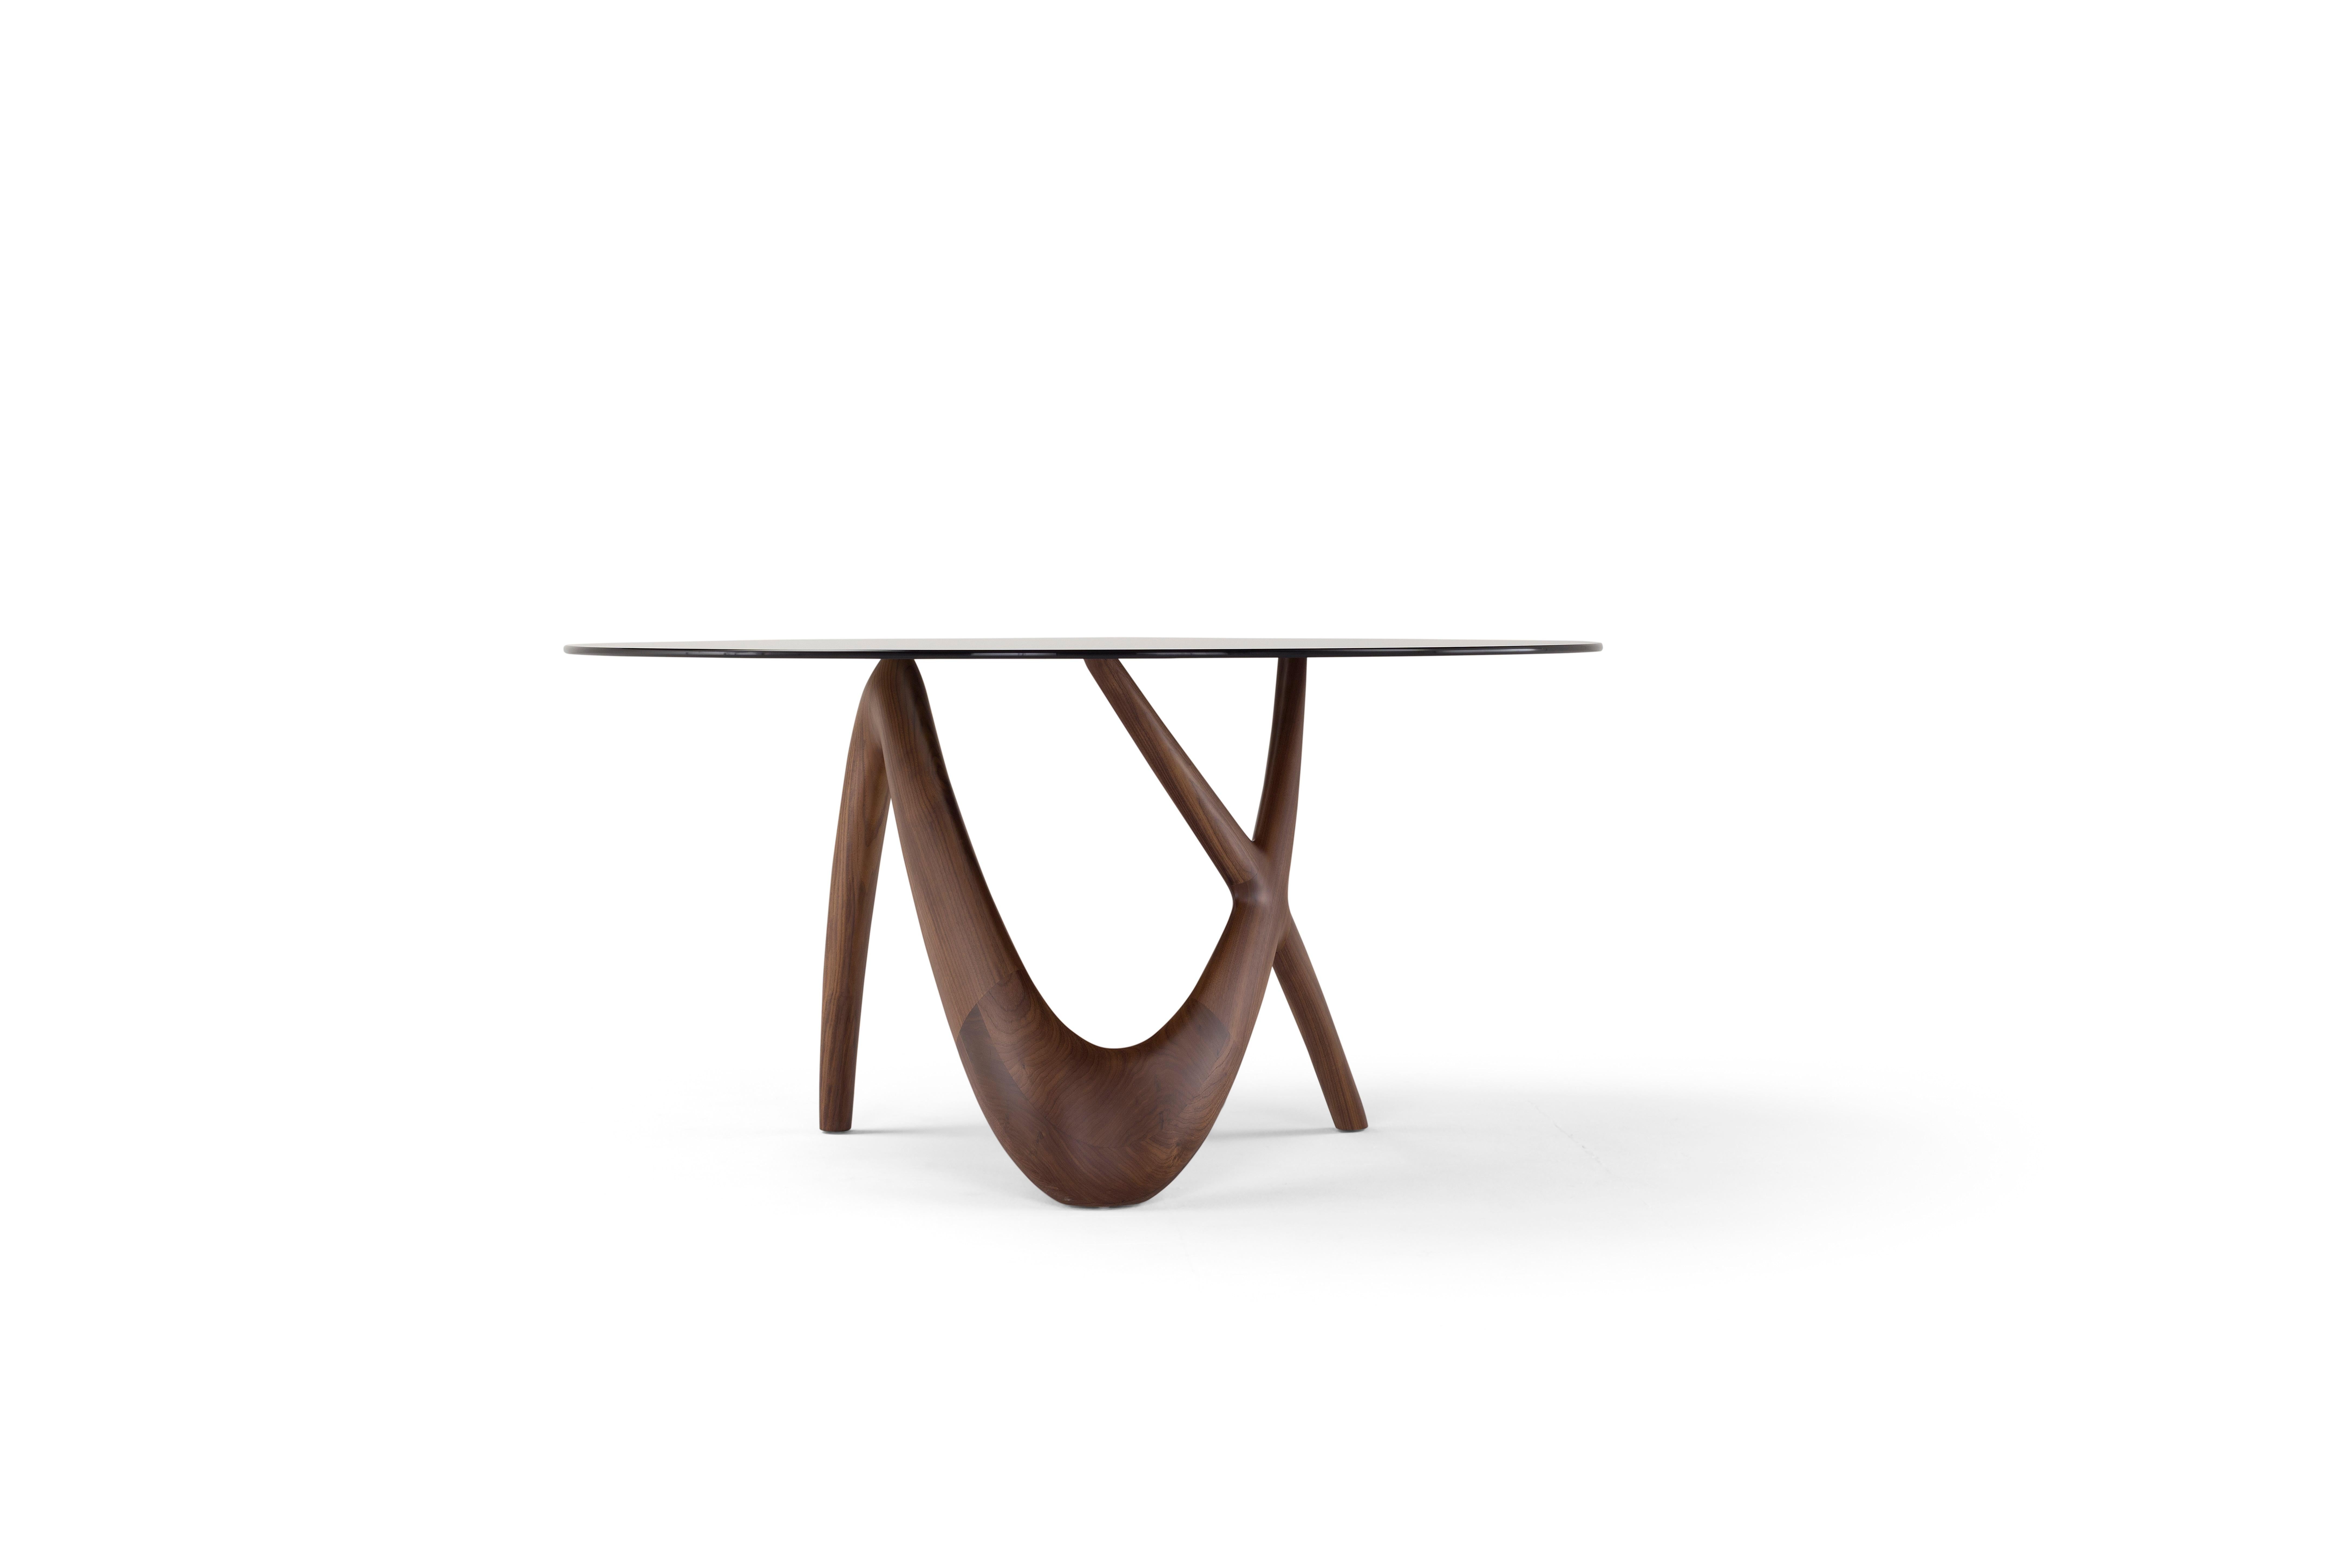 Almost with the features of a sculpture is NX, the table that overcomes the fixedness and the linearity of its most classic shape through a dynamic play of volumes with bursting energy. The innovative and central element of this table is the body in